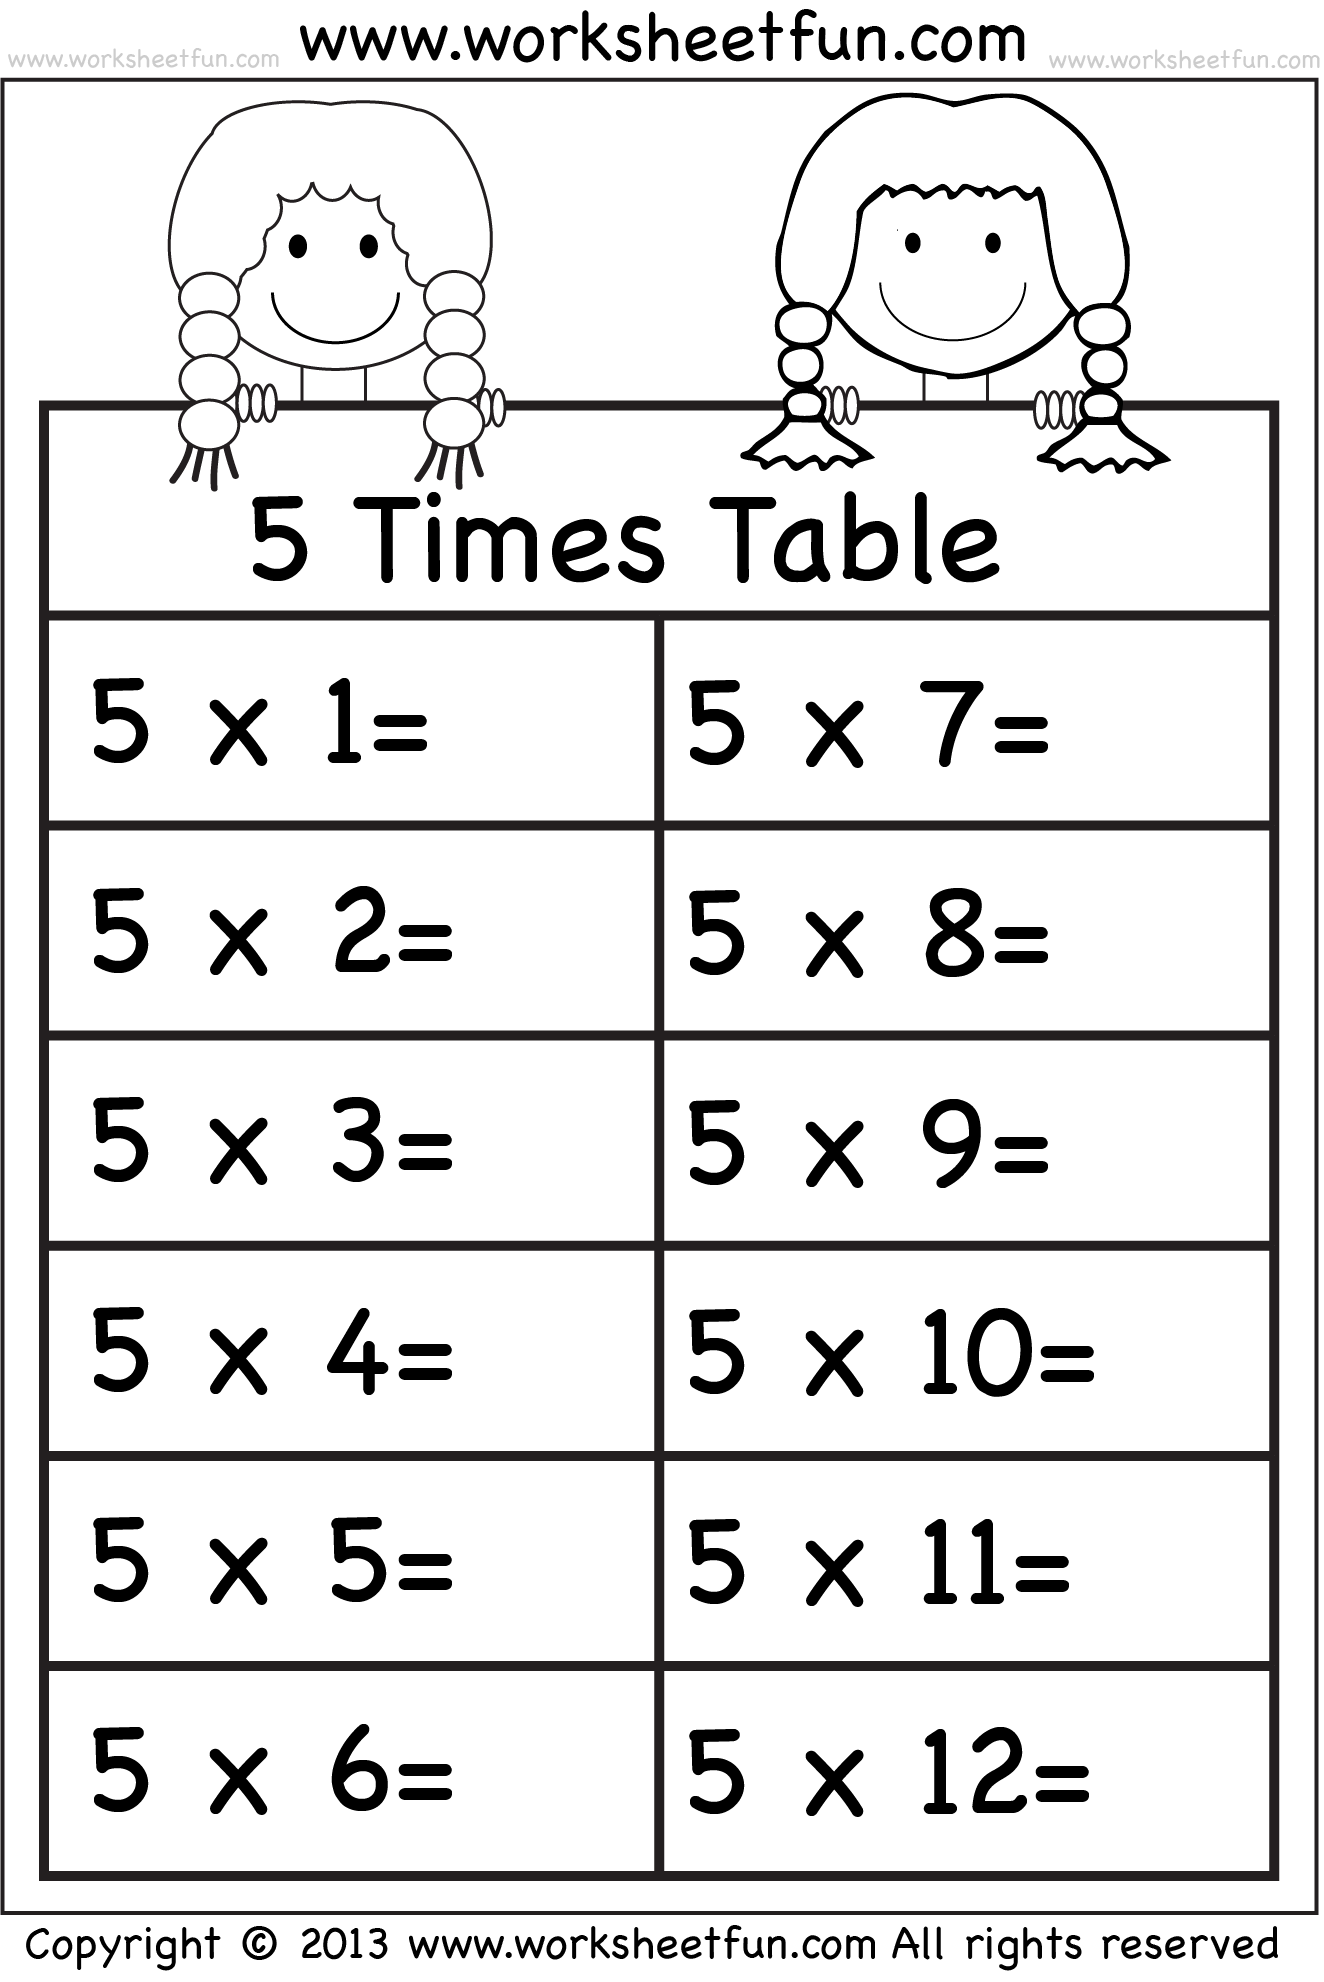 Times Tables Worksheets 2, 3, 4, 5, 6, 7, 8, 9, 10, 11 and 12